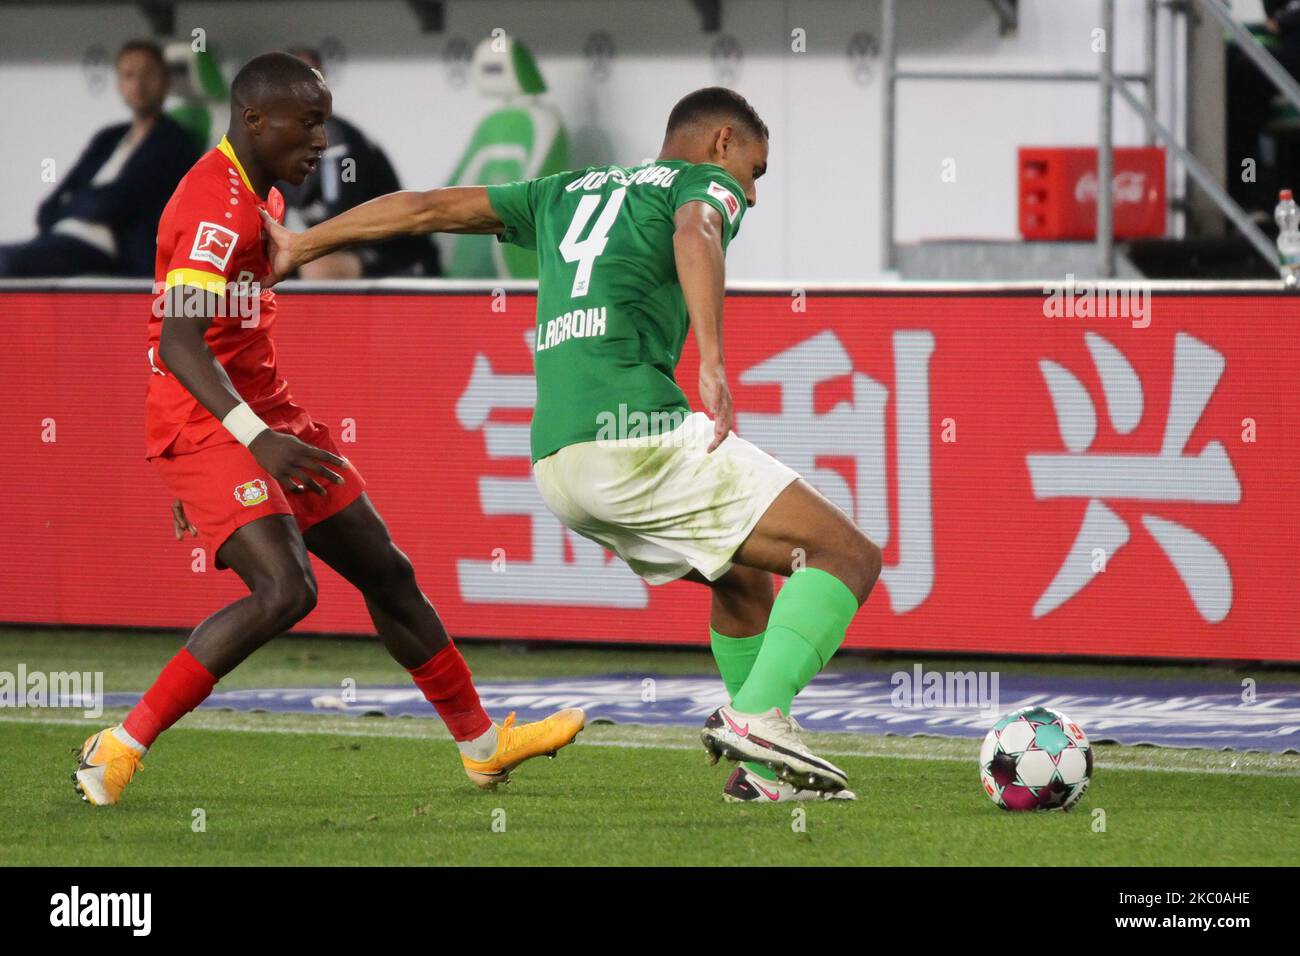 Moussa Diaby of Bayer 04 Leverkusen and Maxence Lacroix of VfL Wolfsburg battle for the ball during the Bundesliga match between VfL Wolfsburg and Bayer 04 Leverkusen at Volkswagen Arena on September 20, 2020 in Wolfsburg, Germany. (Photo by Peter Niedung/NurPhoto) Stock Photo